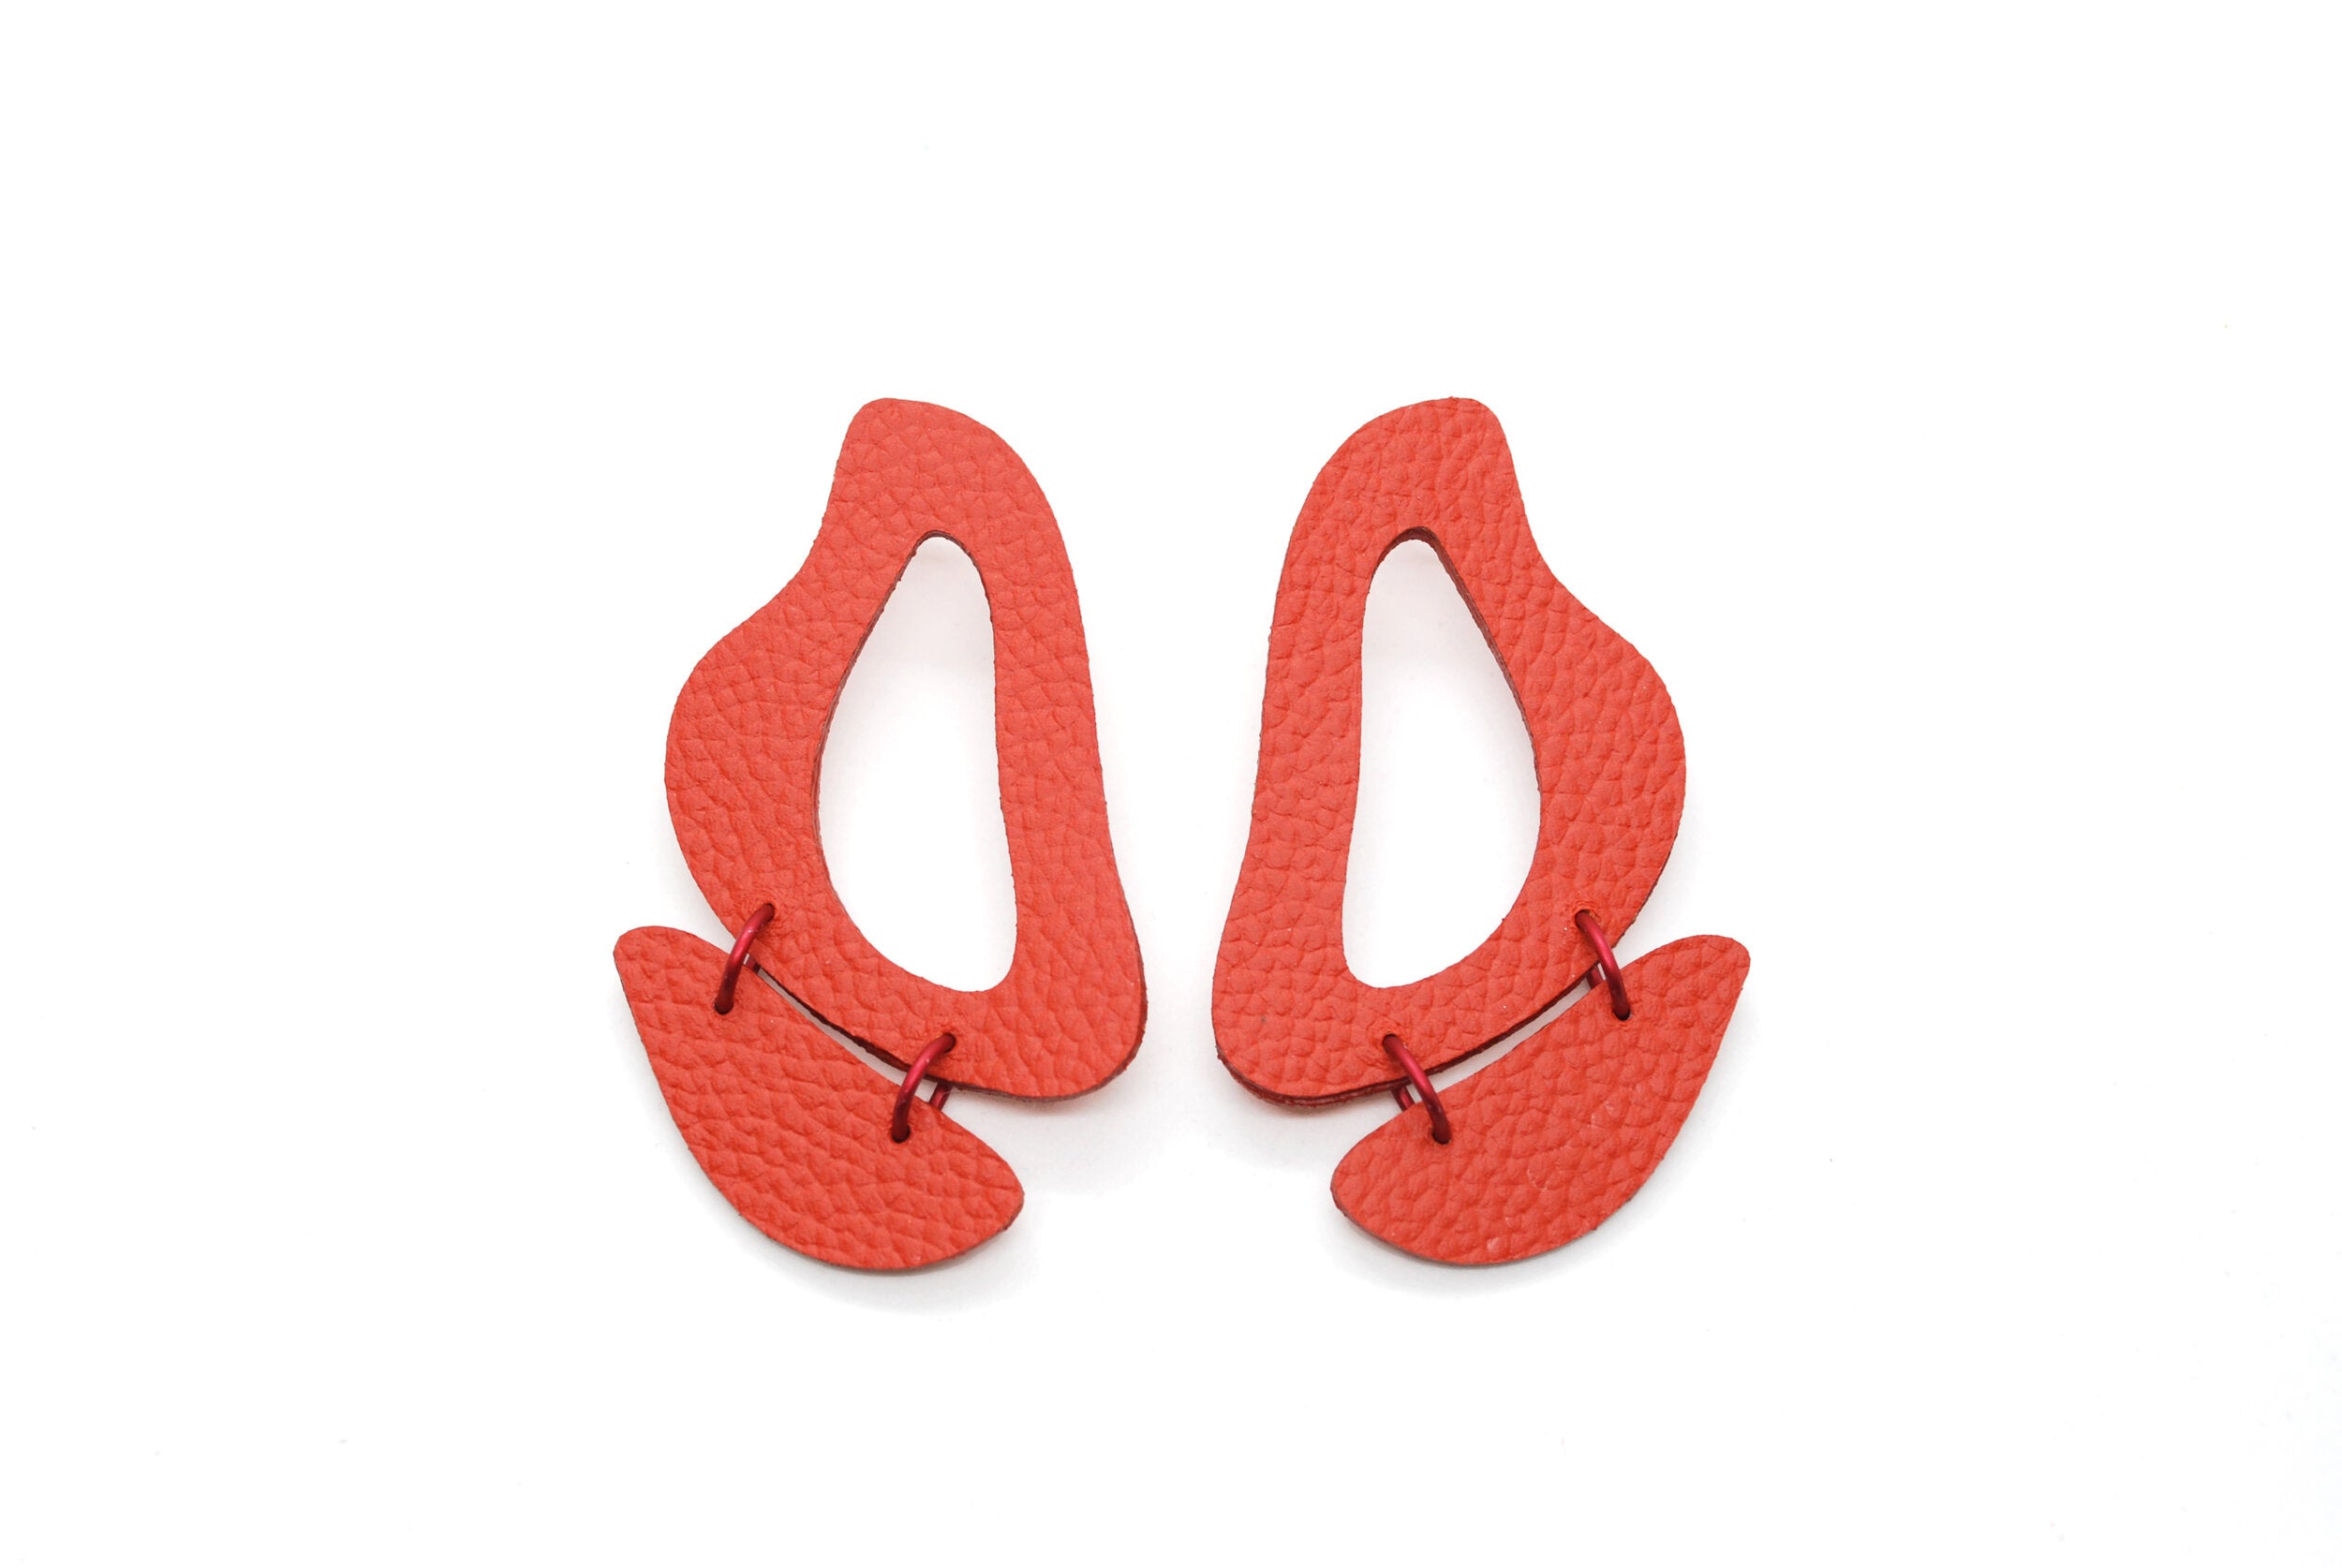 Red Leather Earrings made of Cutout Organic Shapes and Anodized Aluminum Jump Rings.